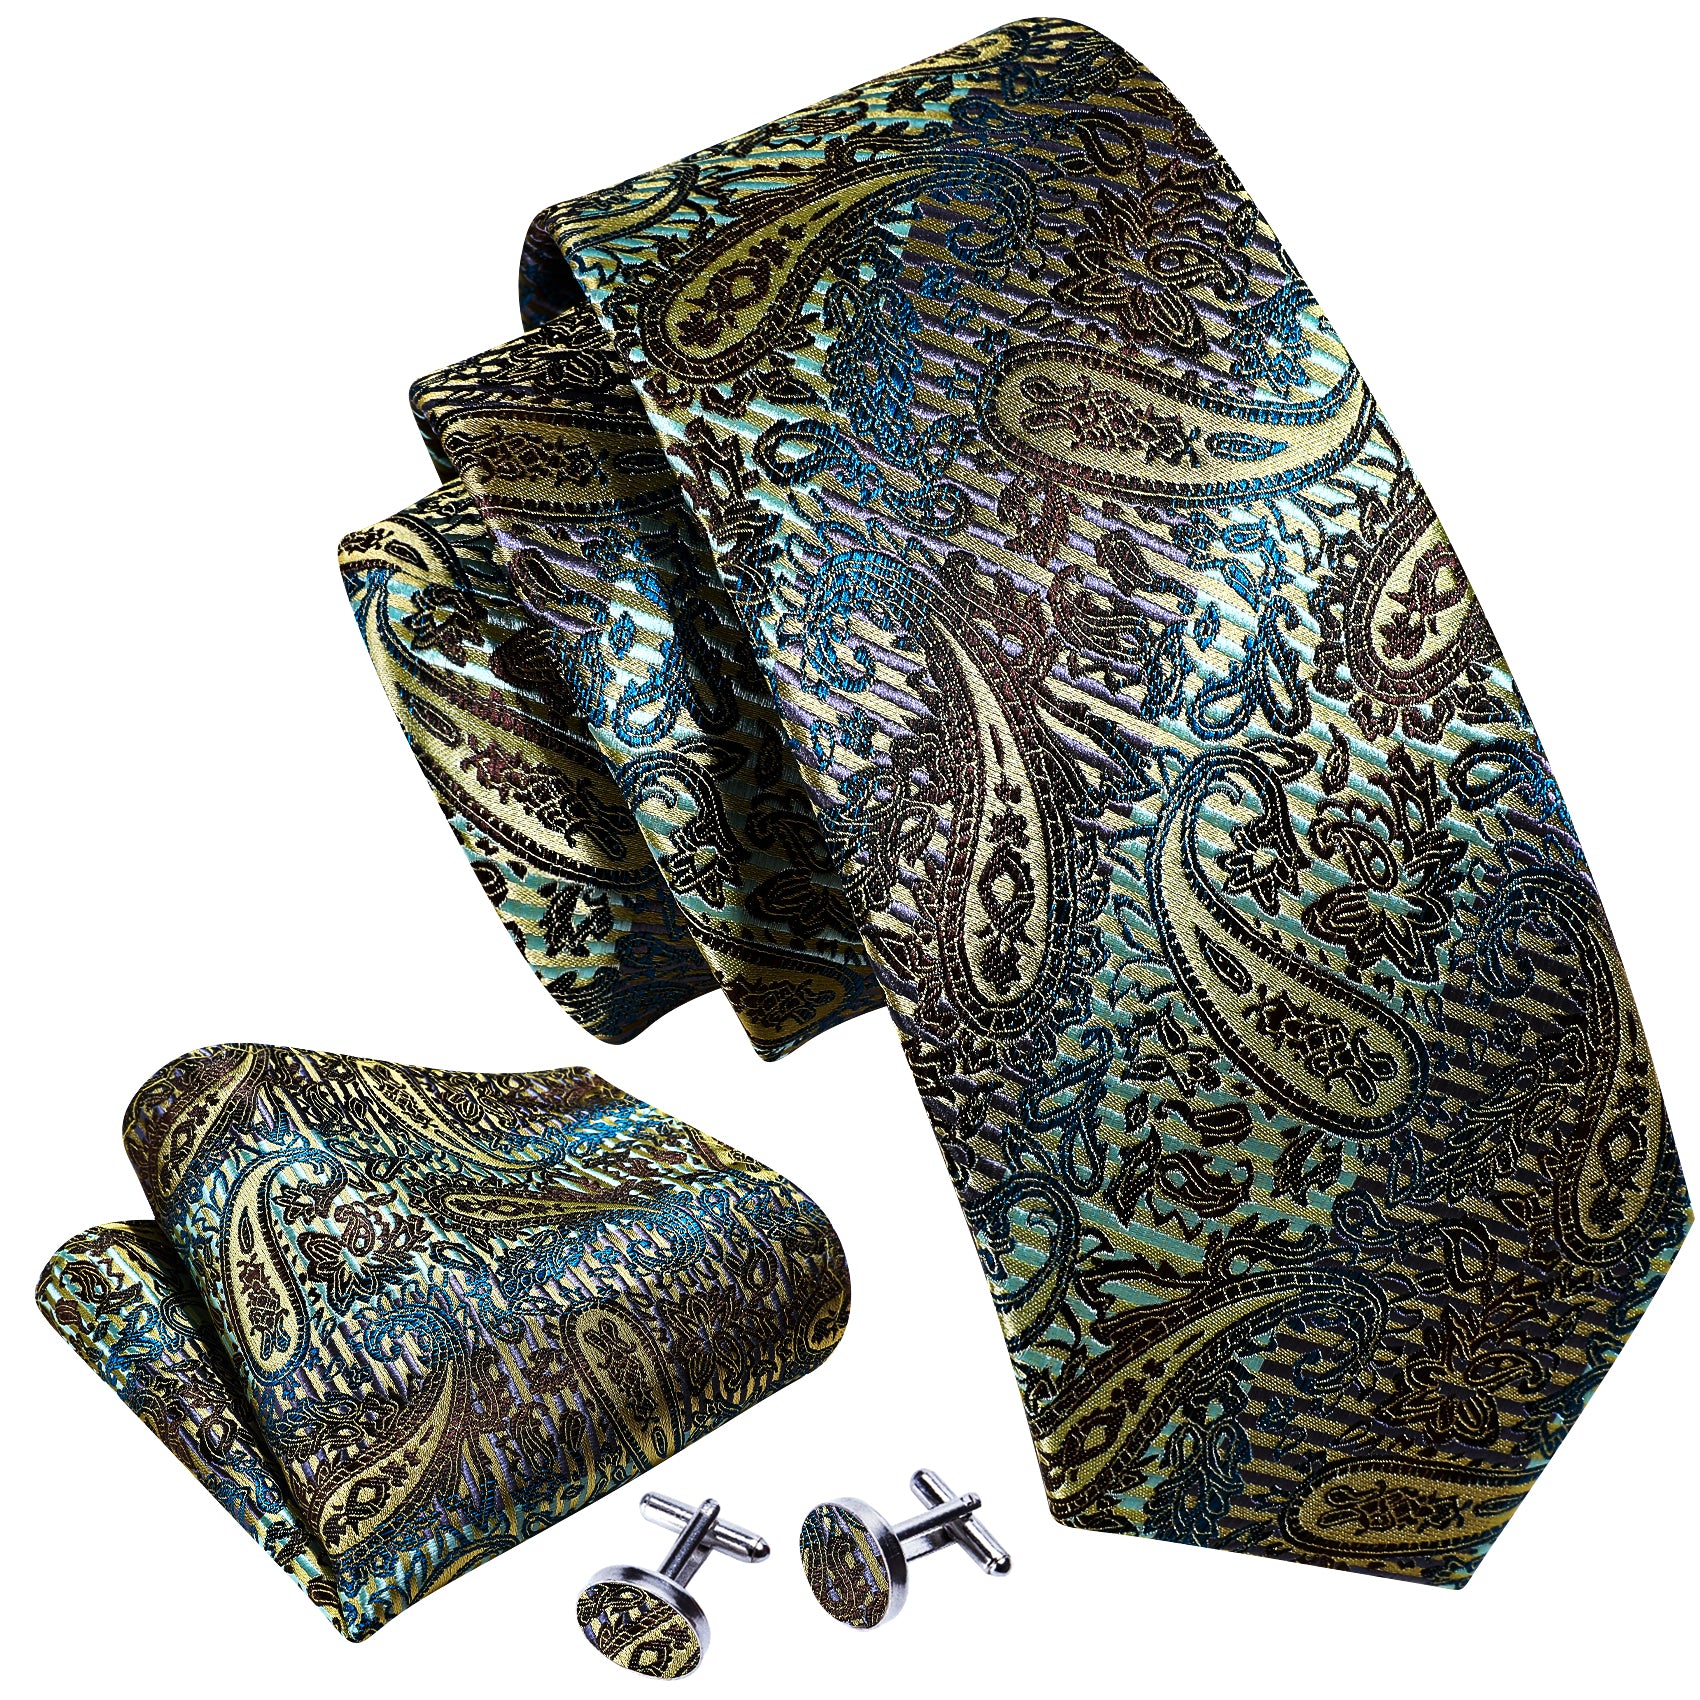 Barry.Wang Black Tie Gold Paisley Men's Silk Tie Pocket Square Cufflinks Set 59 Inches